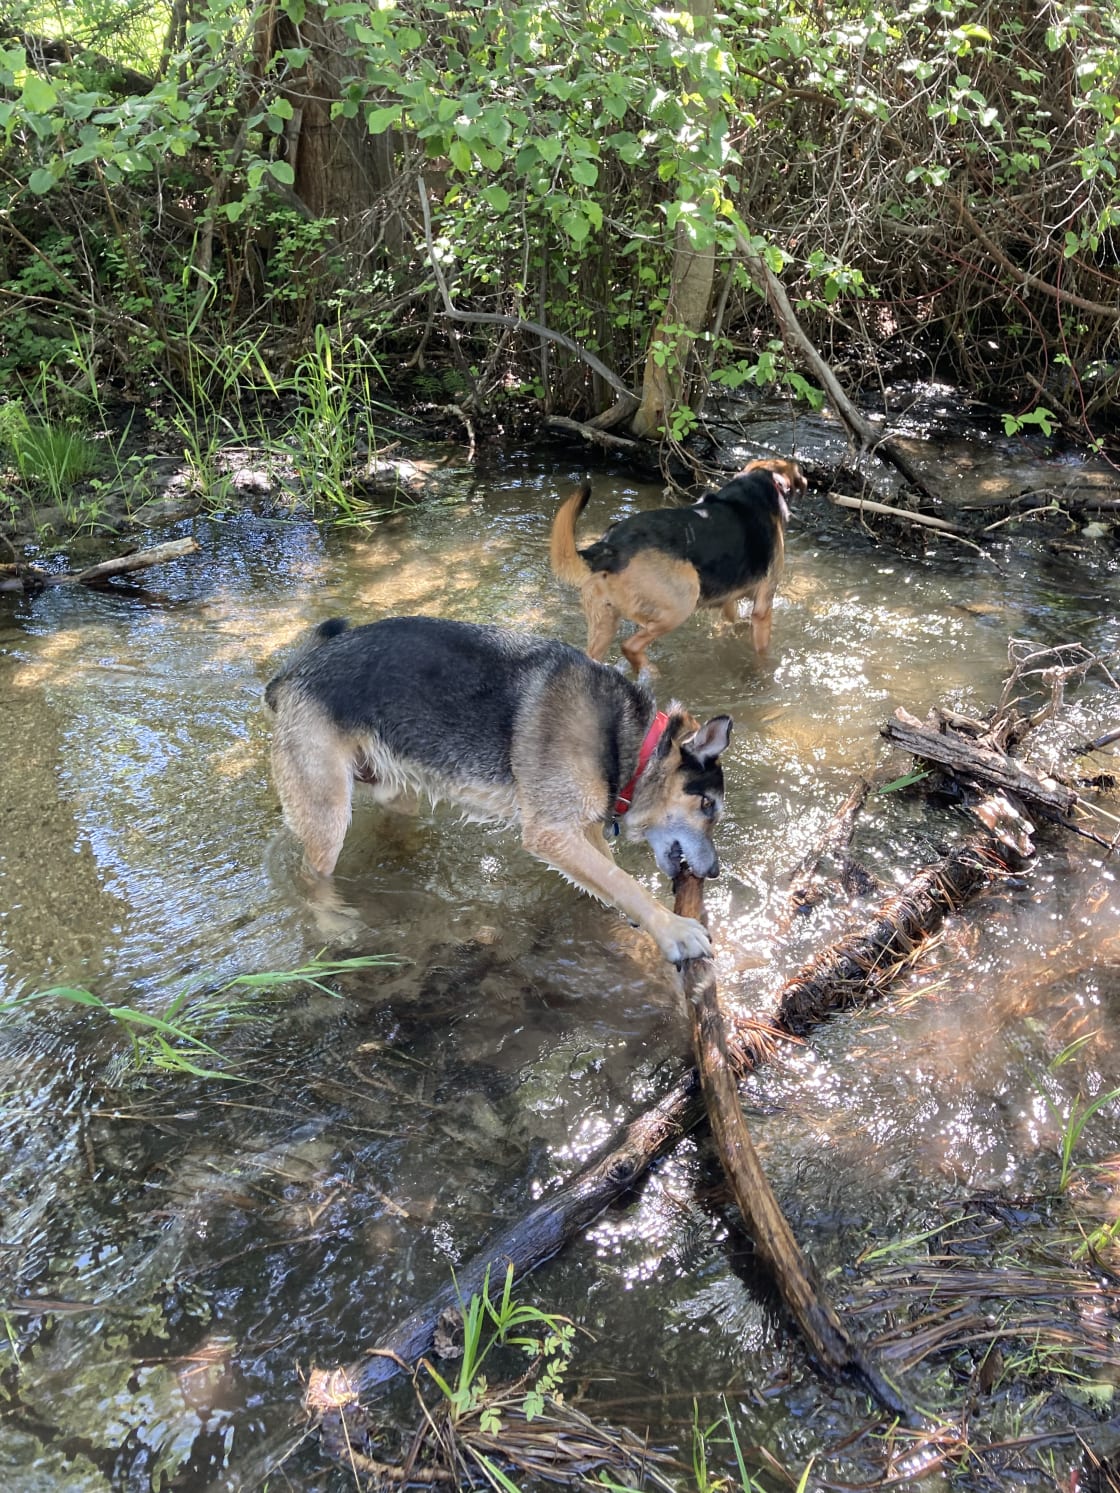 Just a short walk out of the ranch entrance, we found access to this creek for the dogs to play!